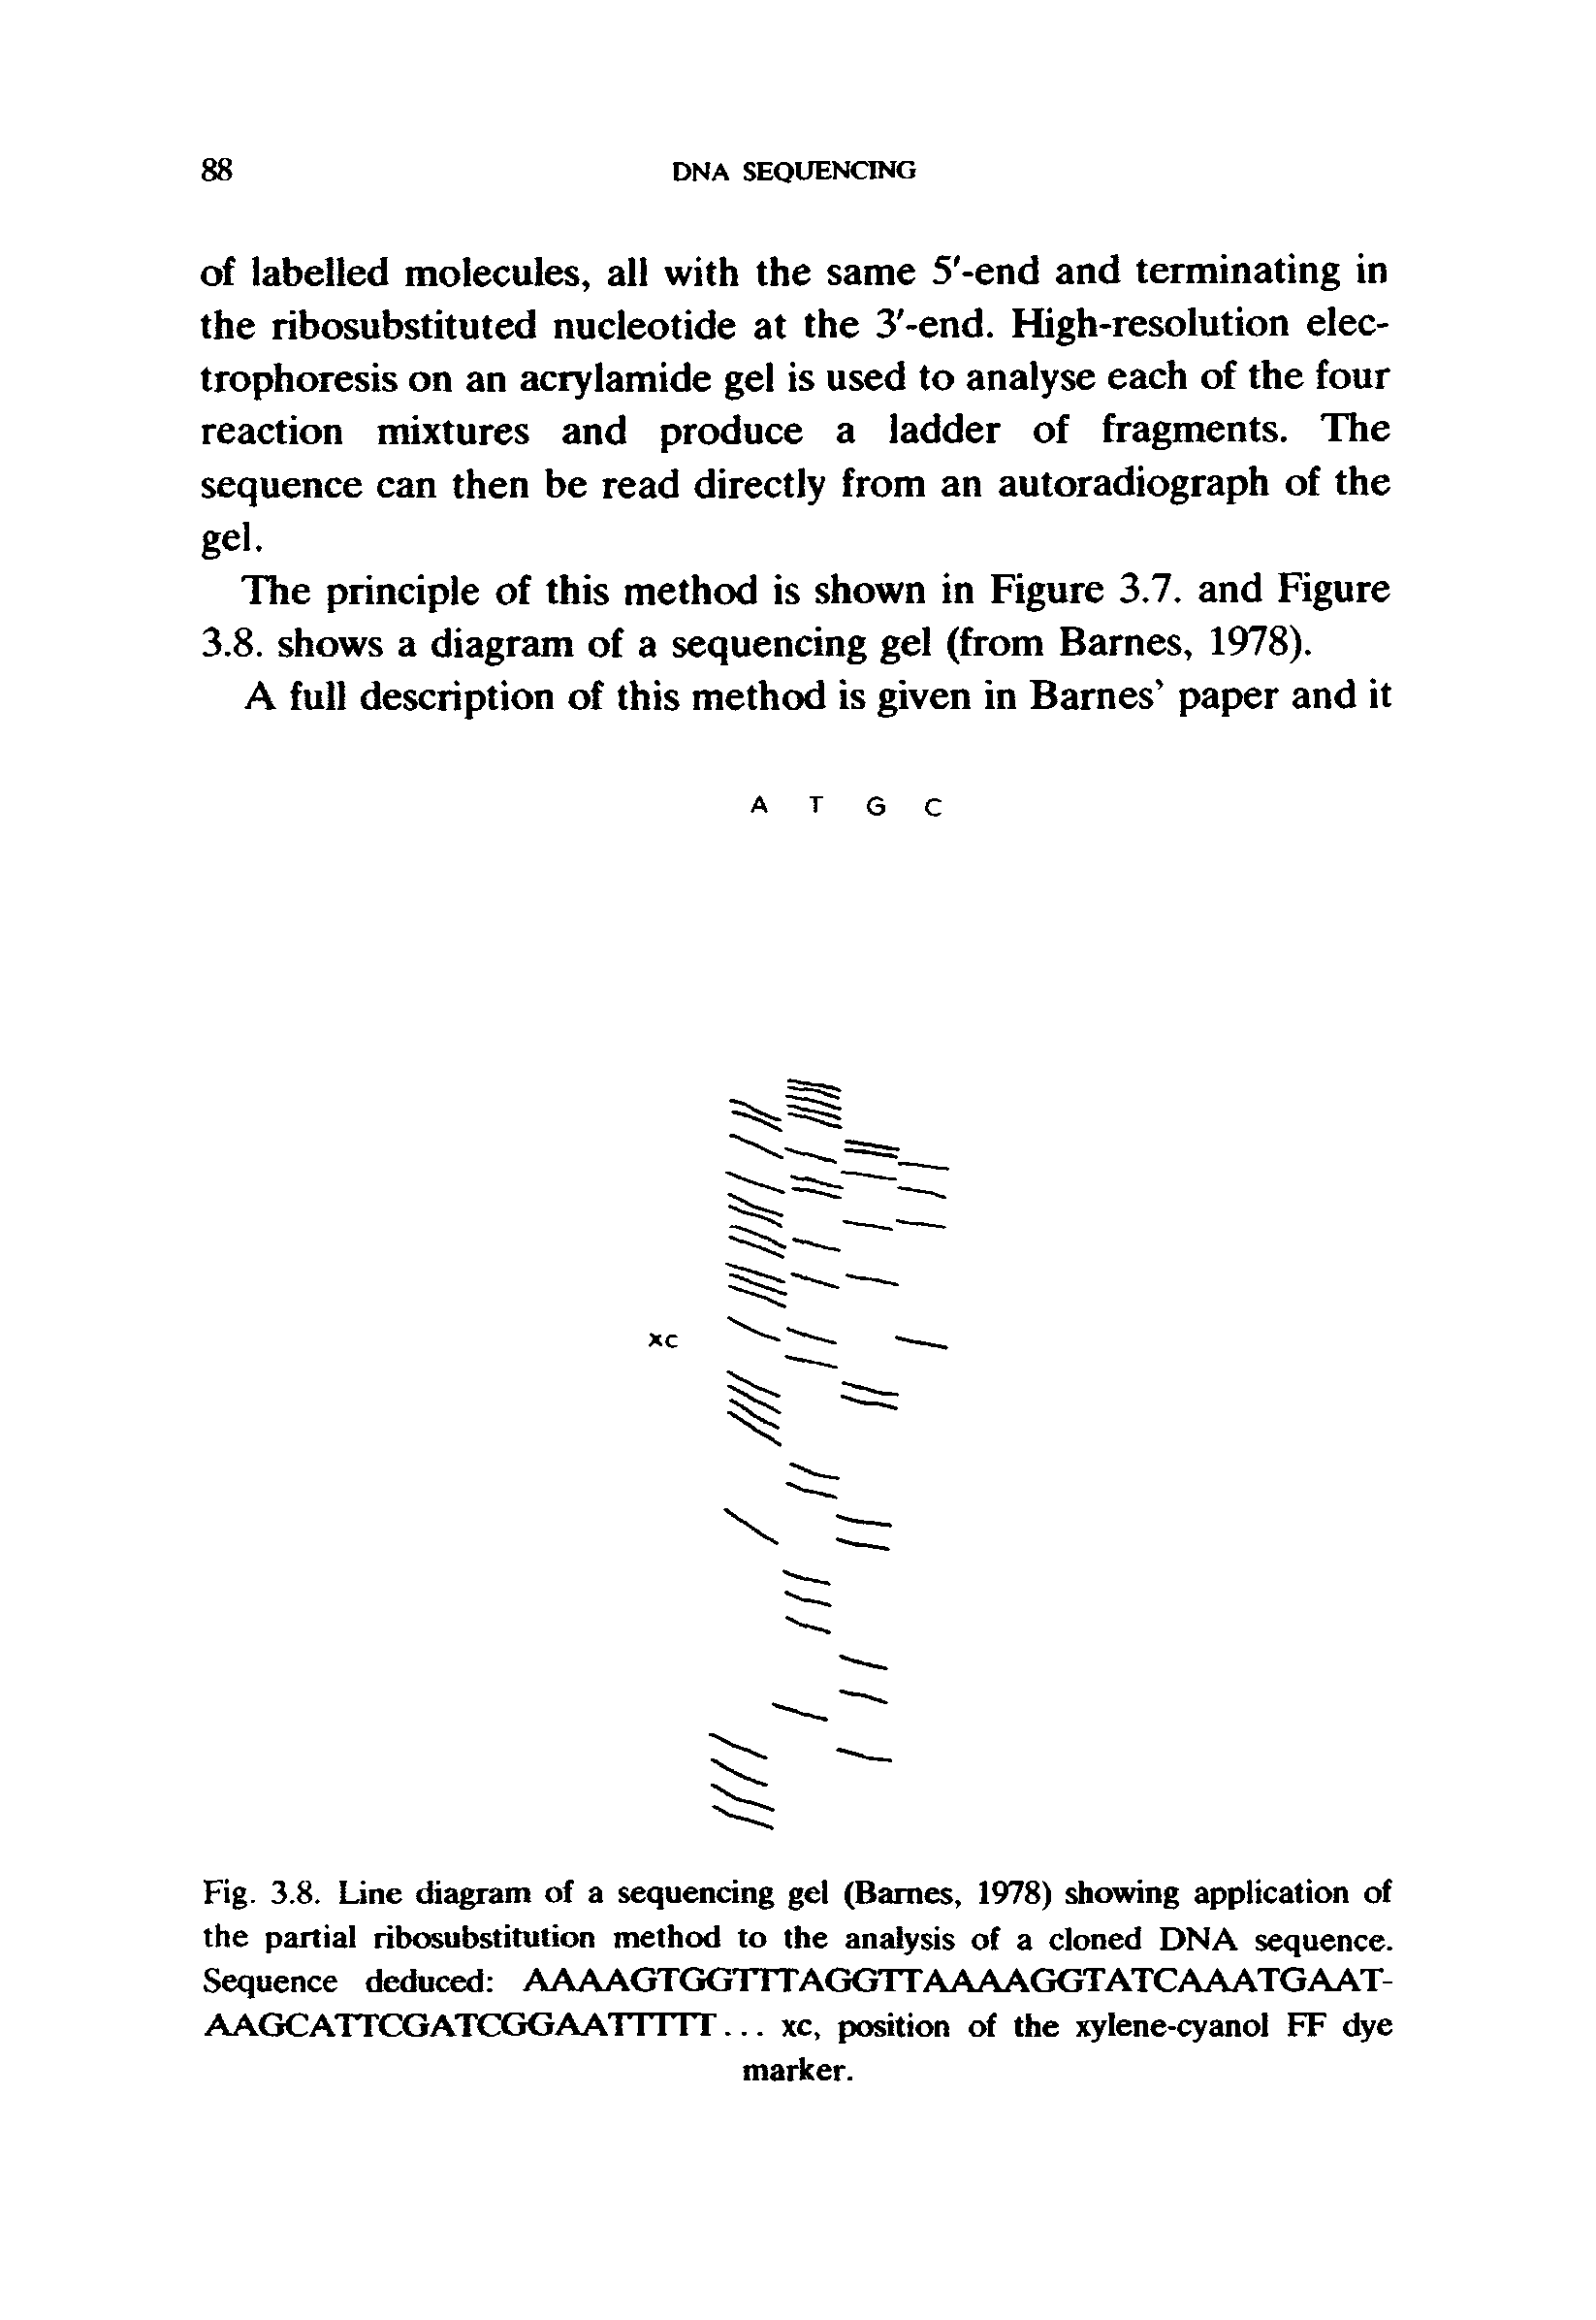 Fig. 3.8. Line diagram of a sequencing gel (Baines, 1978) showing application of the partial ribosubstitution method to the analysis of a cloned DNA sequence. Sequence deduced AAAAGTGGTTTAGGTTAAAAGGTATC AAATG AAT AAGC ATTCGATCGG AA r till. .. xc, position of the xylene-cyanol FF dye...